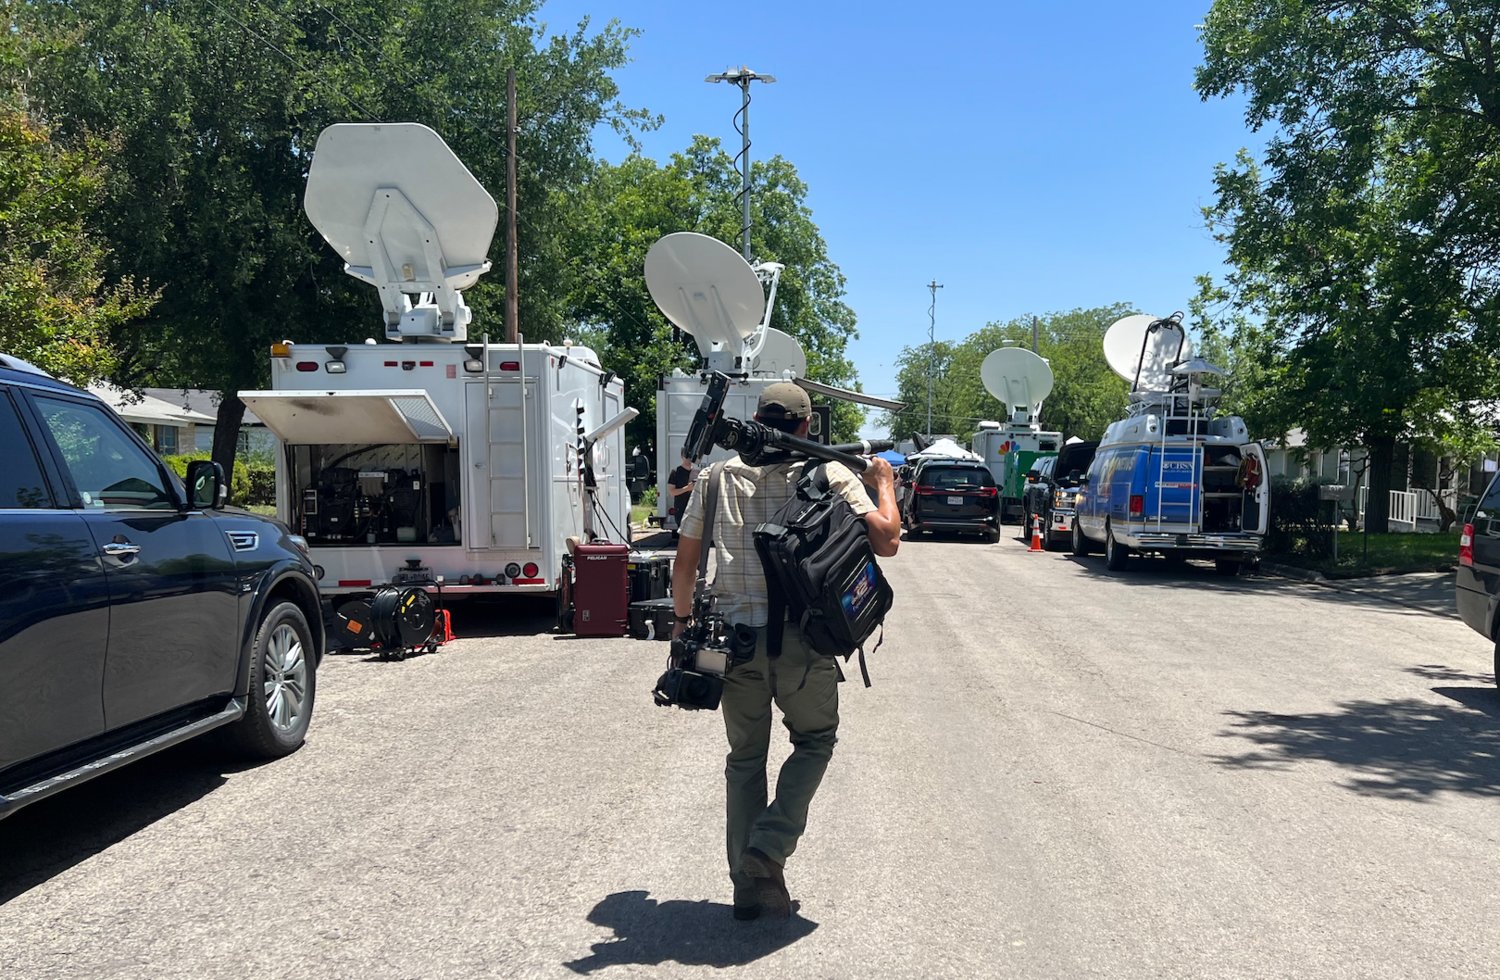 Three weeks after the tragedy at Robb Elementary School in Uvalde, Texas, TV, radio and print journalists were still in the community, determined to tell their stories. (Photo courtesy of KSAT/KSAT.com)